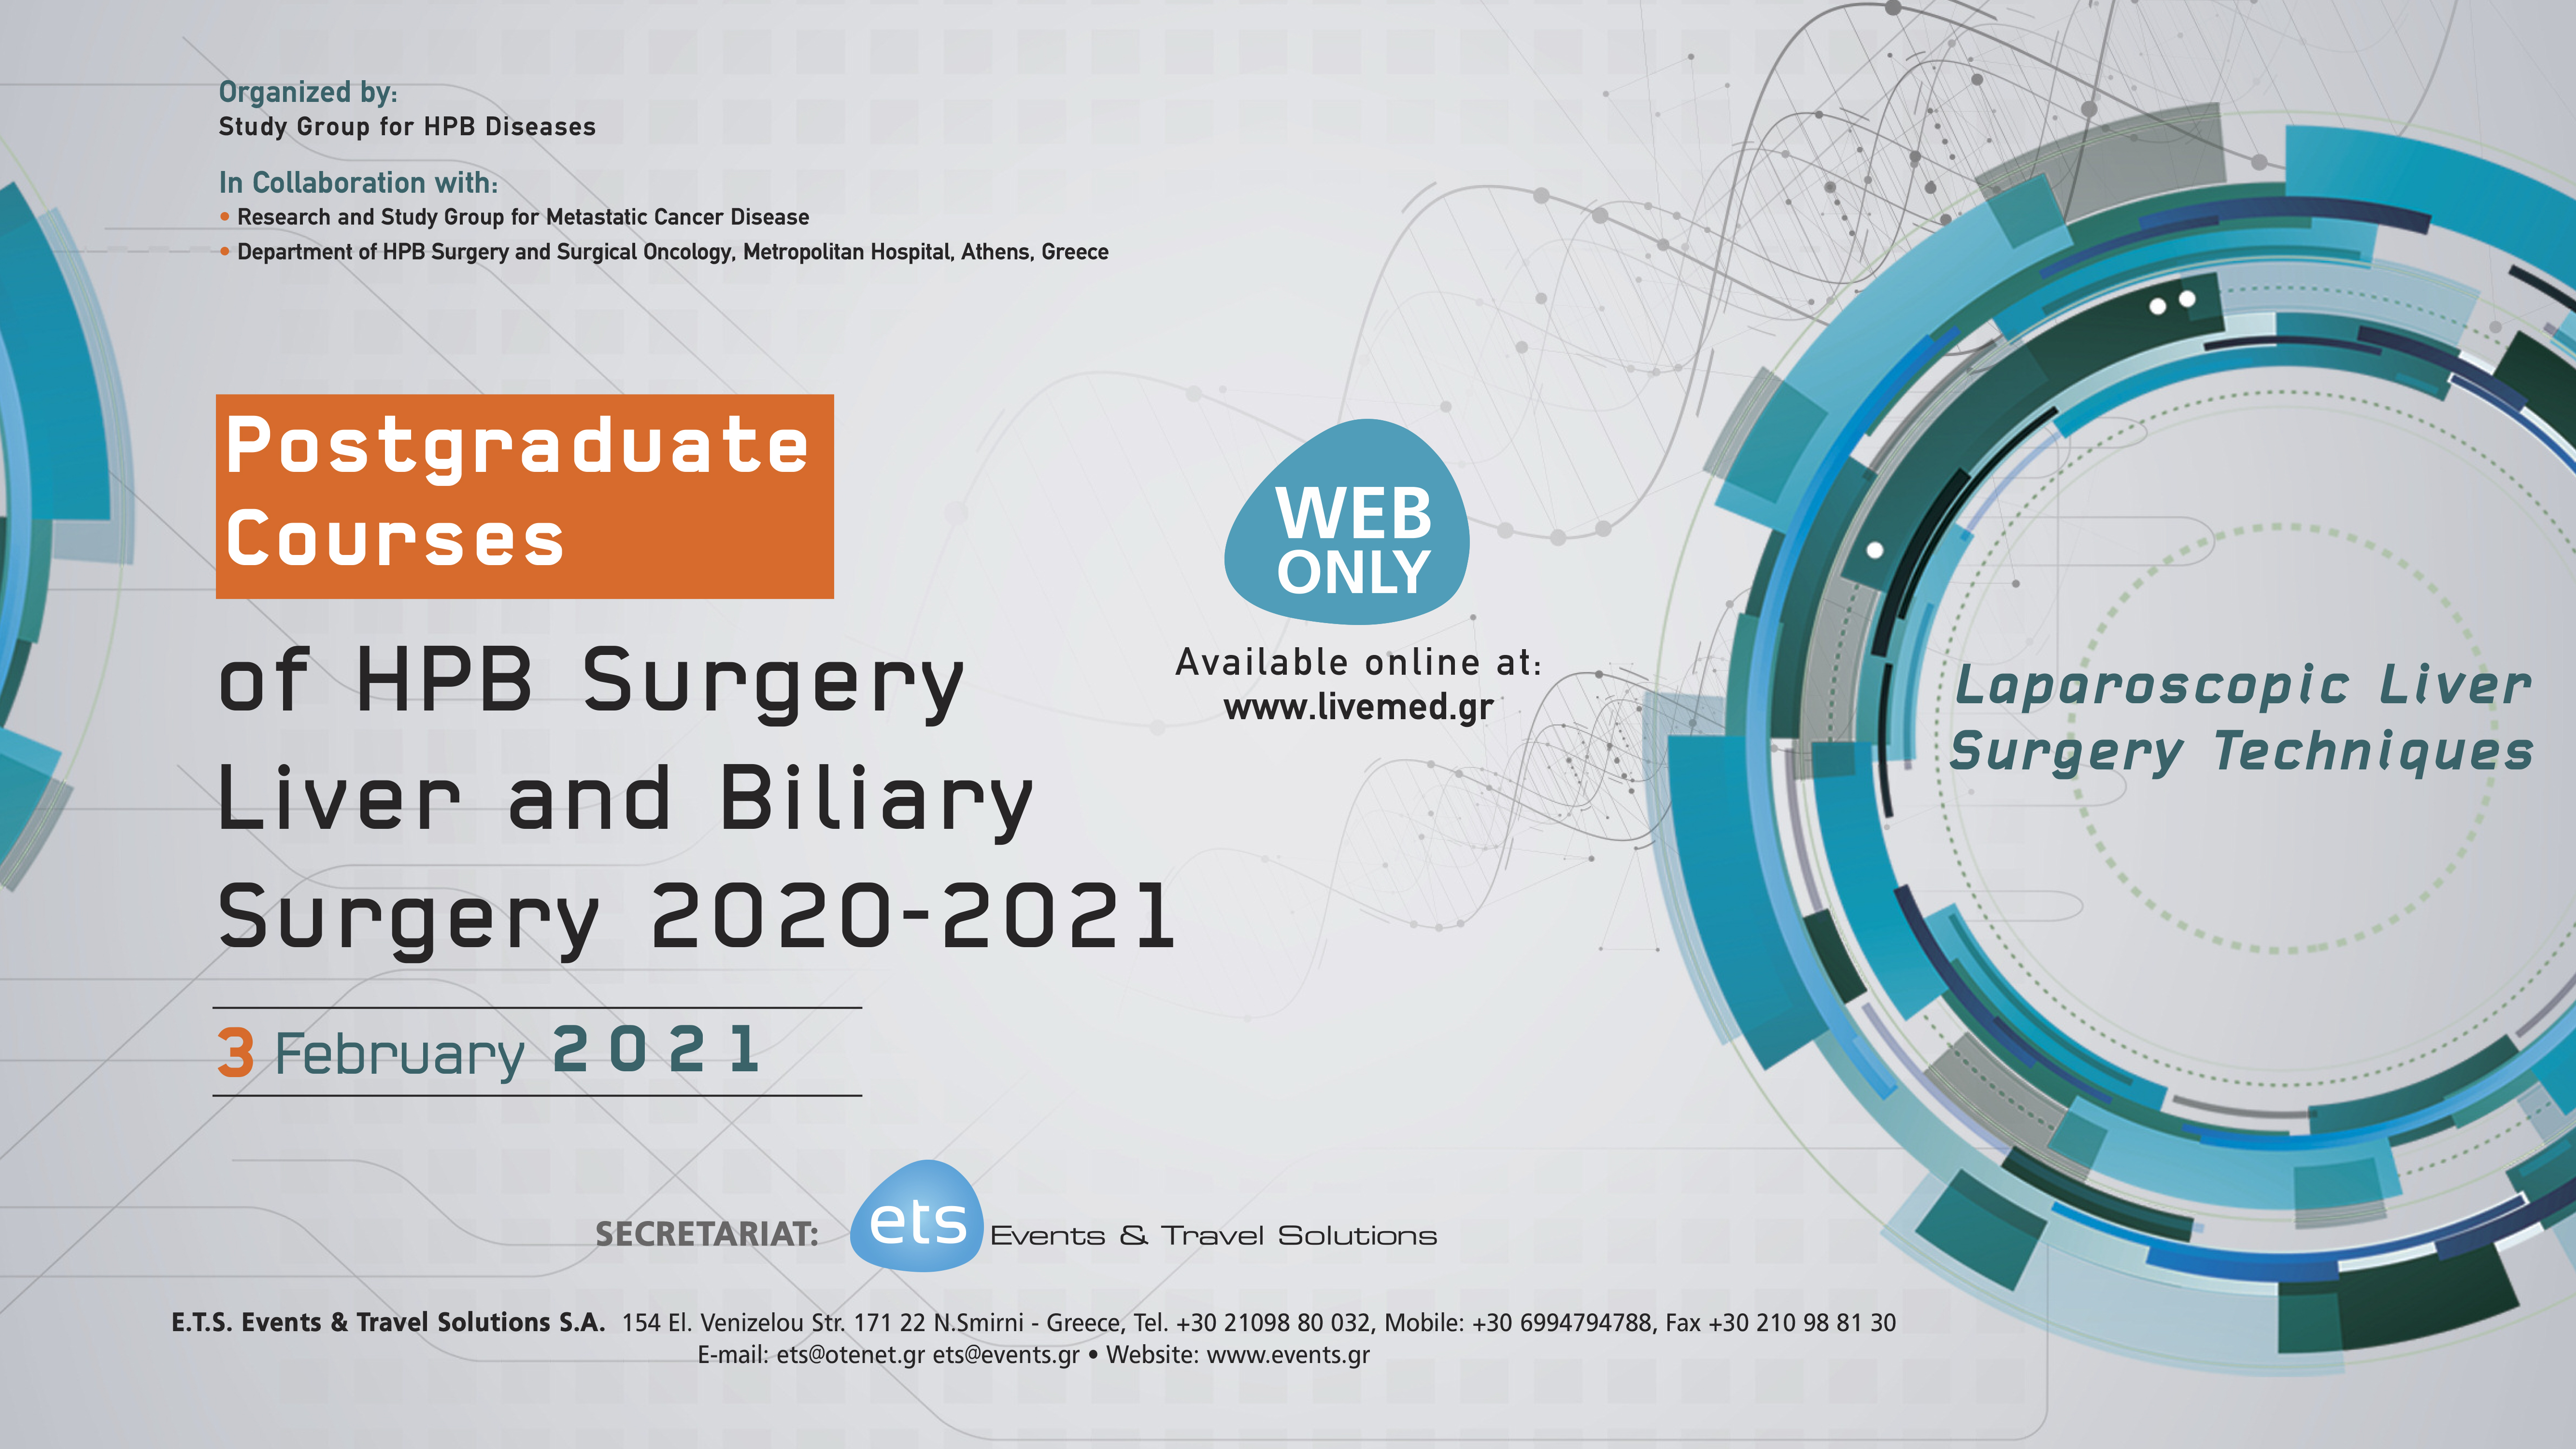 Postgraduate Courses of HPB Surgery Liver and Biliary Surgery 2020-2021 - Laparoscopic Liver Surgery Techniques